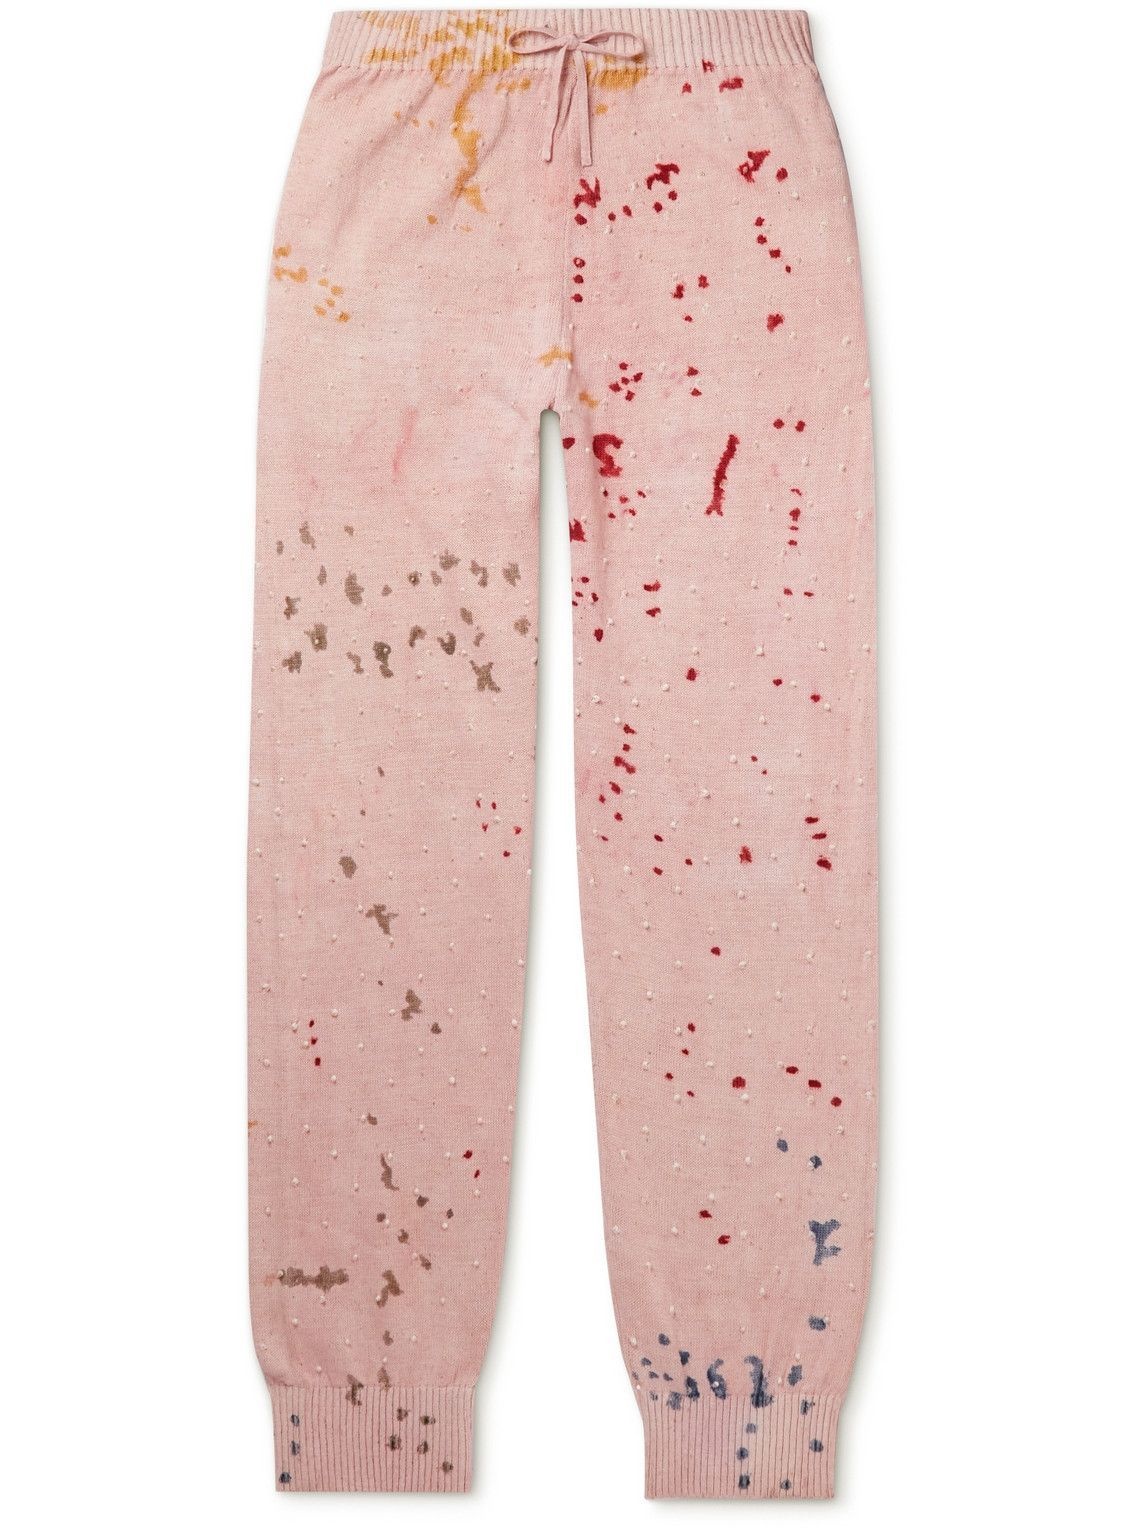 Photo: 11.11/eleven eleven - Straight-Leg Bandhani-Dyed and Painted Organic Cotton Drawstring Trousers - Pink